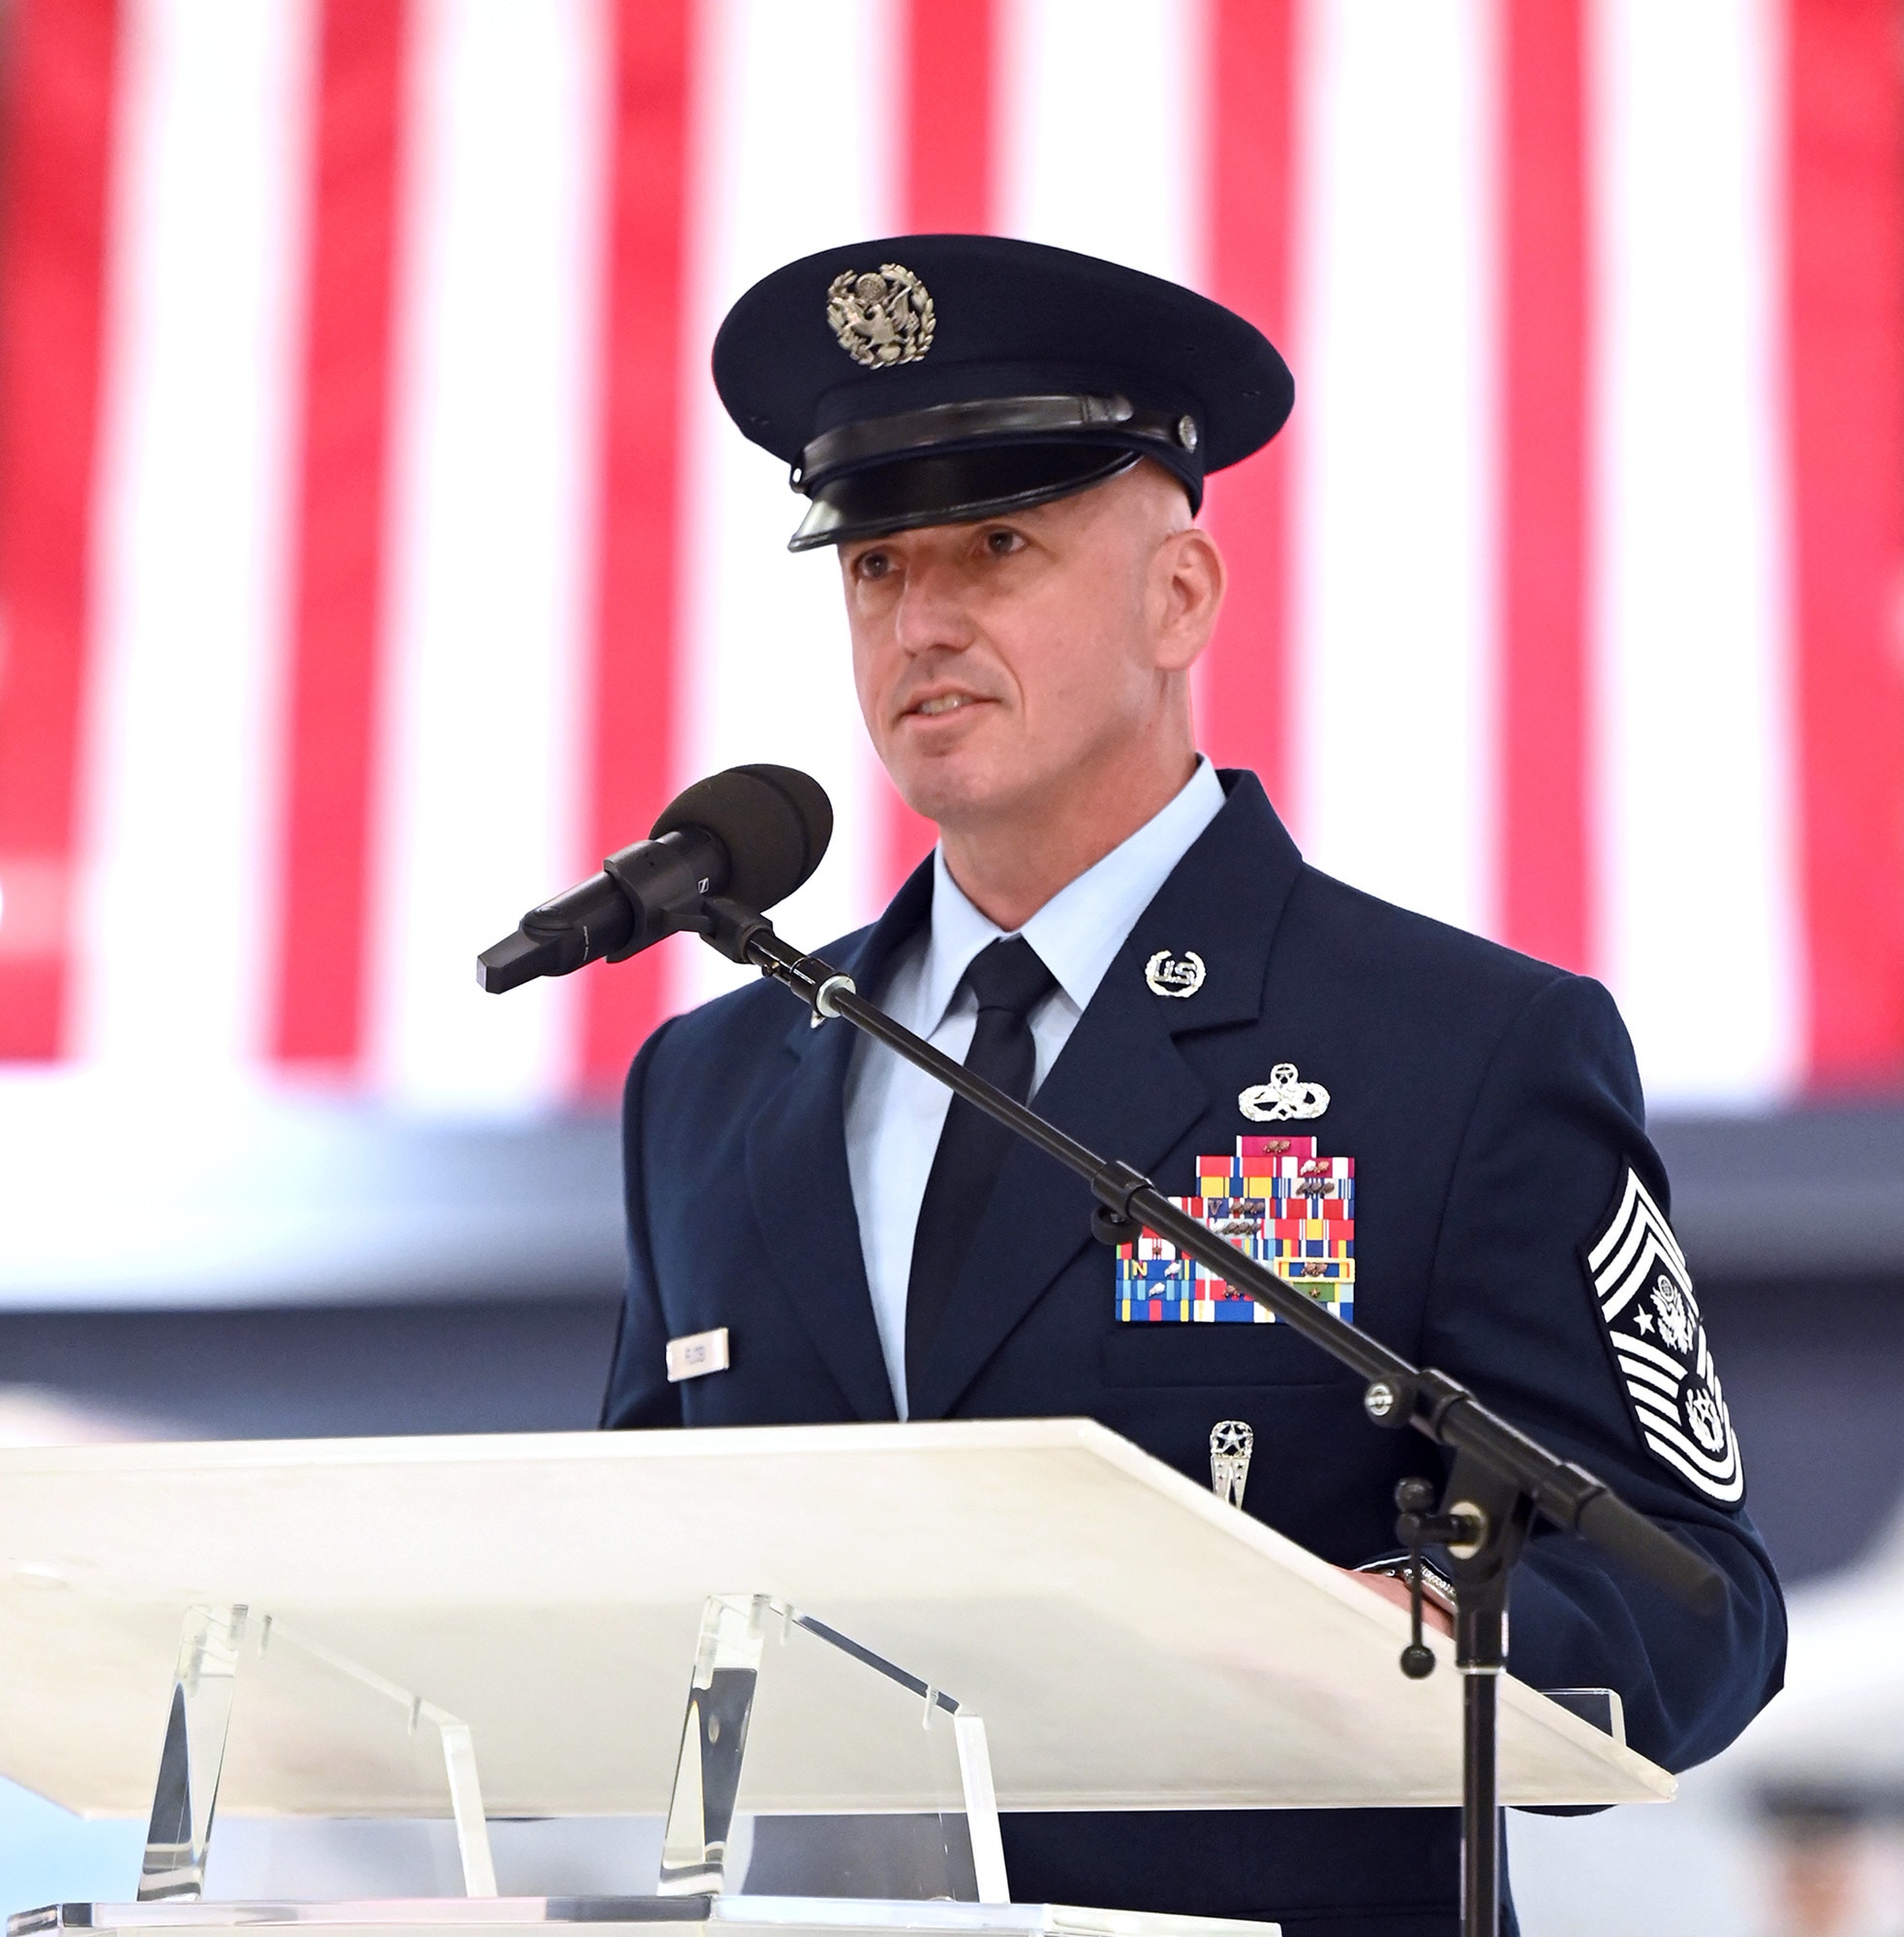 Chief Master Sergeant of the Air Force David Flosi addresses the audience during the chief master sergeant of the Air Force change of responsibility ceremony